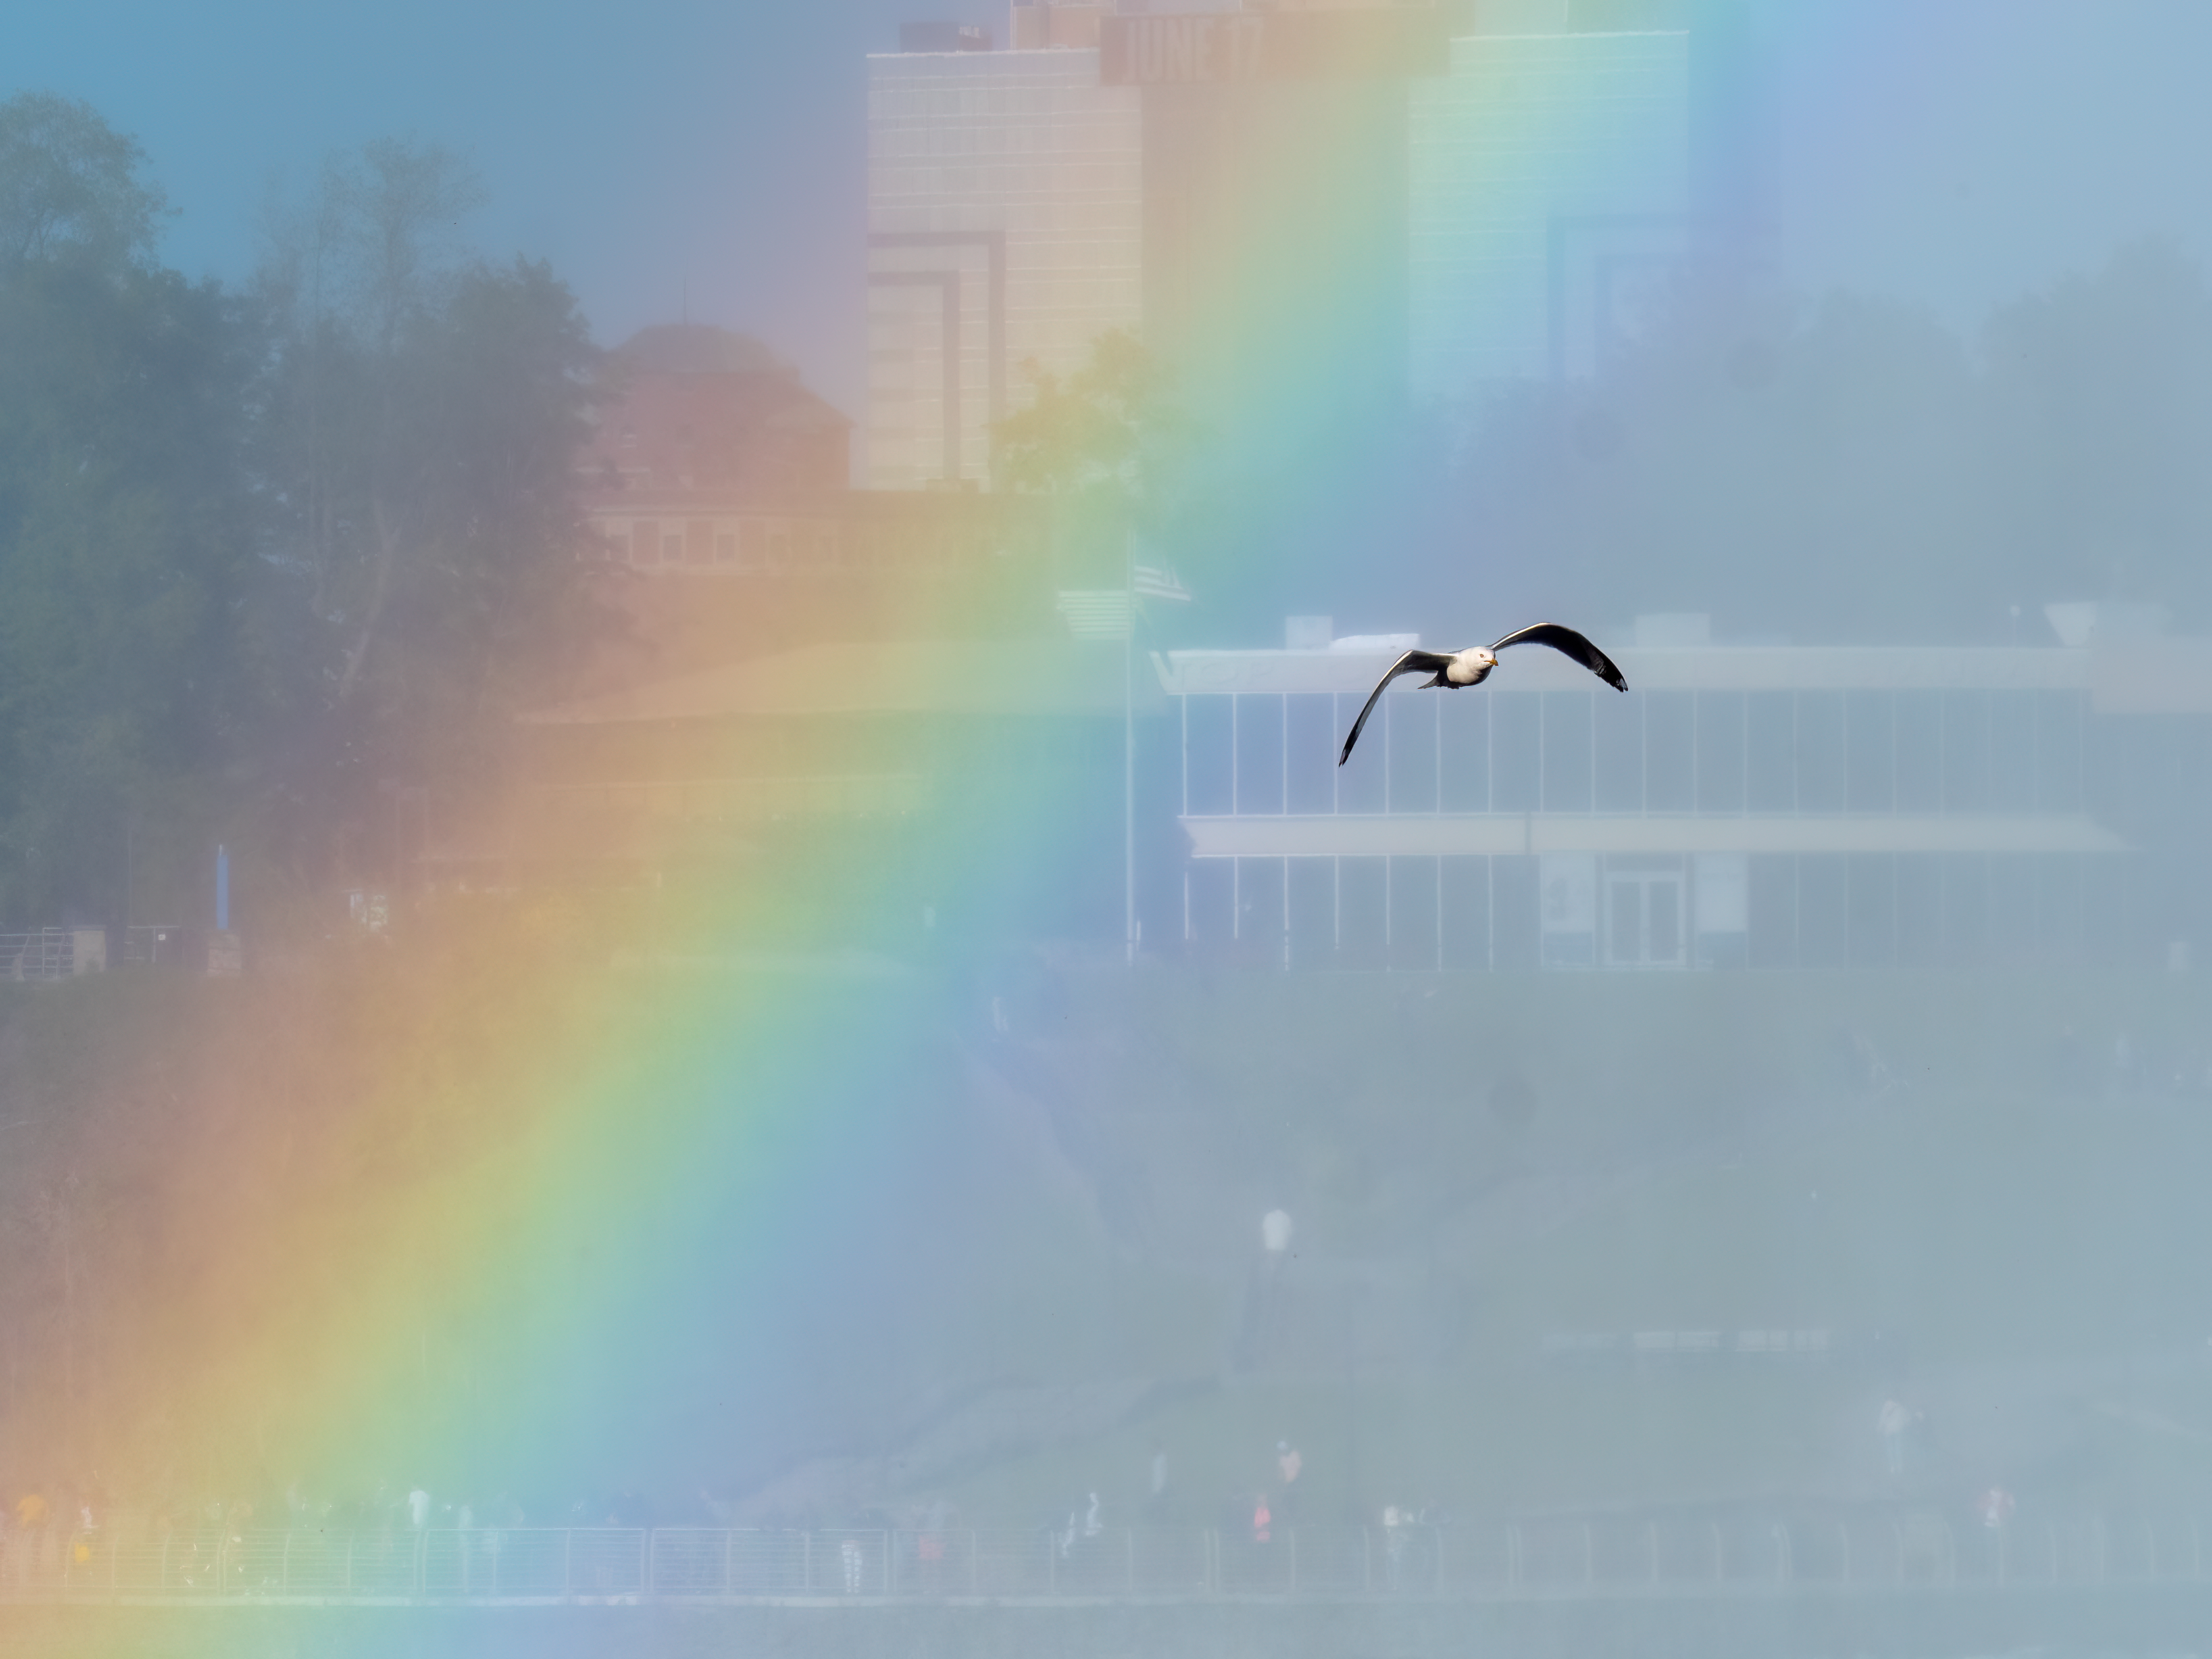 General 4608x3456 sky seagulls nature photography skyscape rainbows